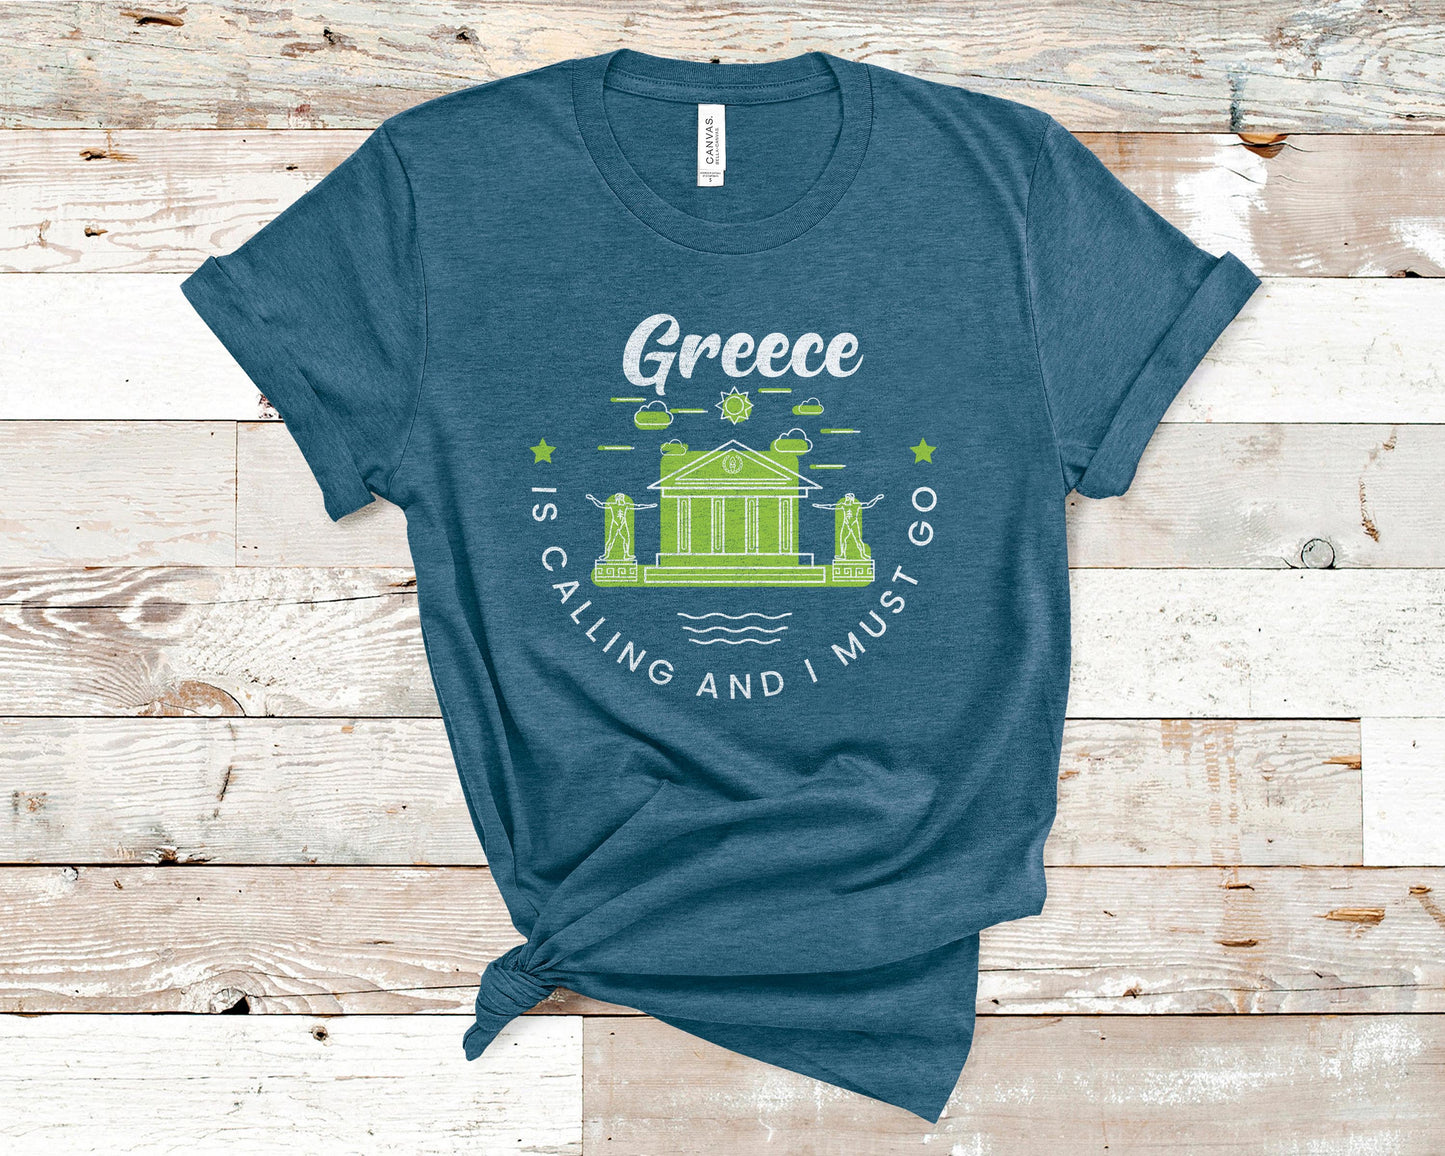 Greece Is Calling and I Must Go - Travel/Vacation